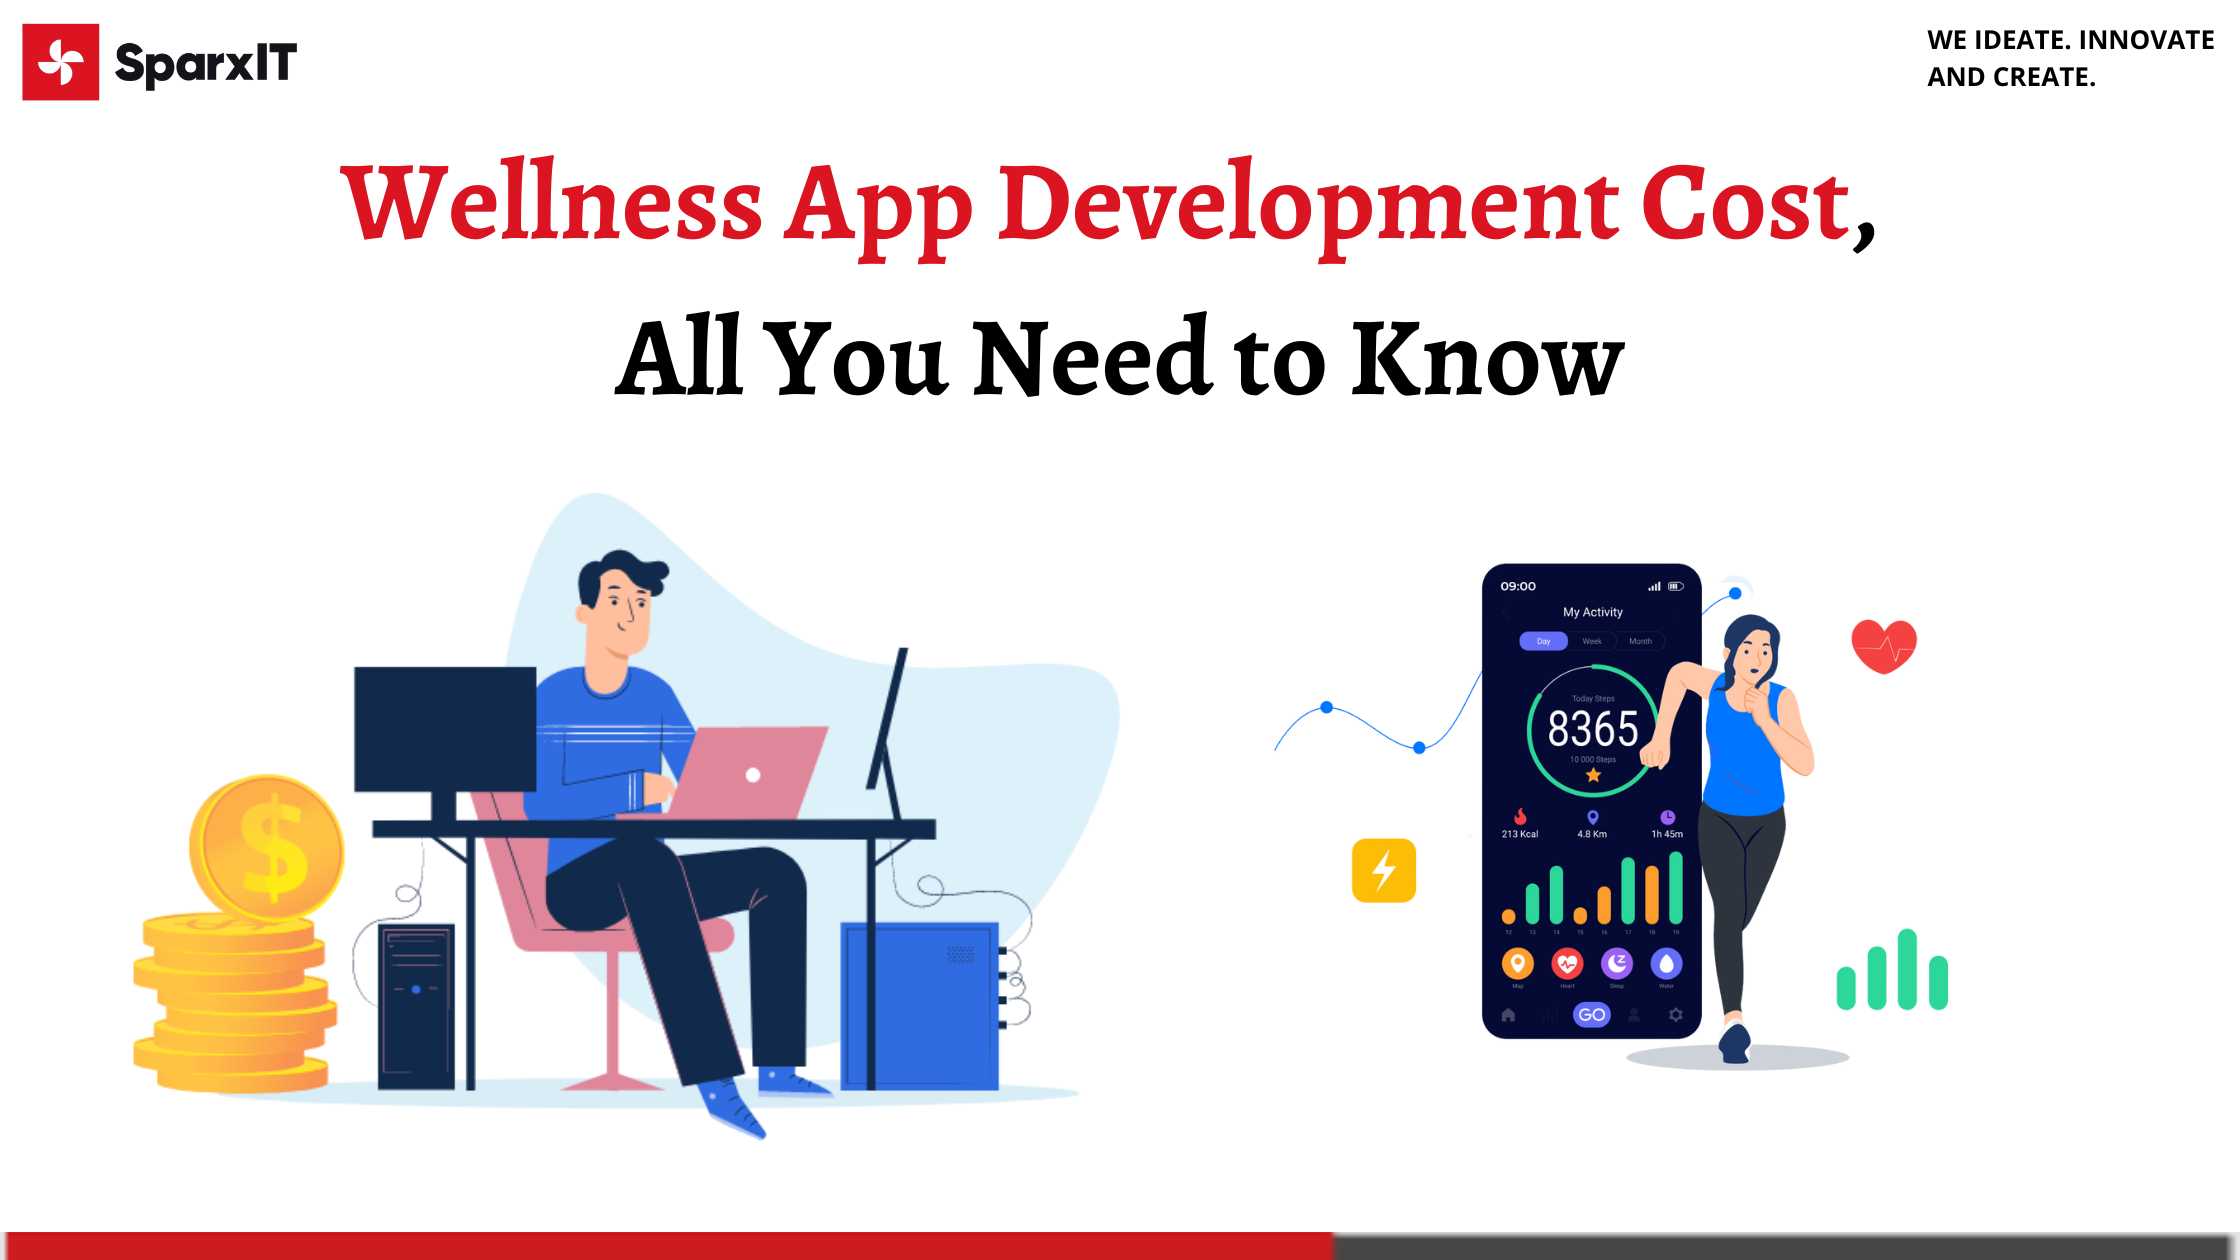 Wellness App Development Cost, All You Need to Know